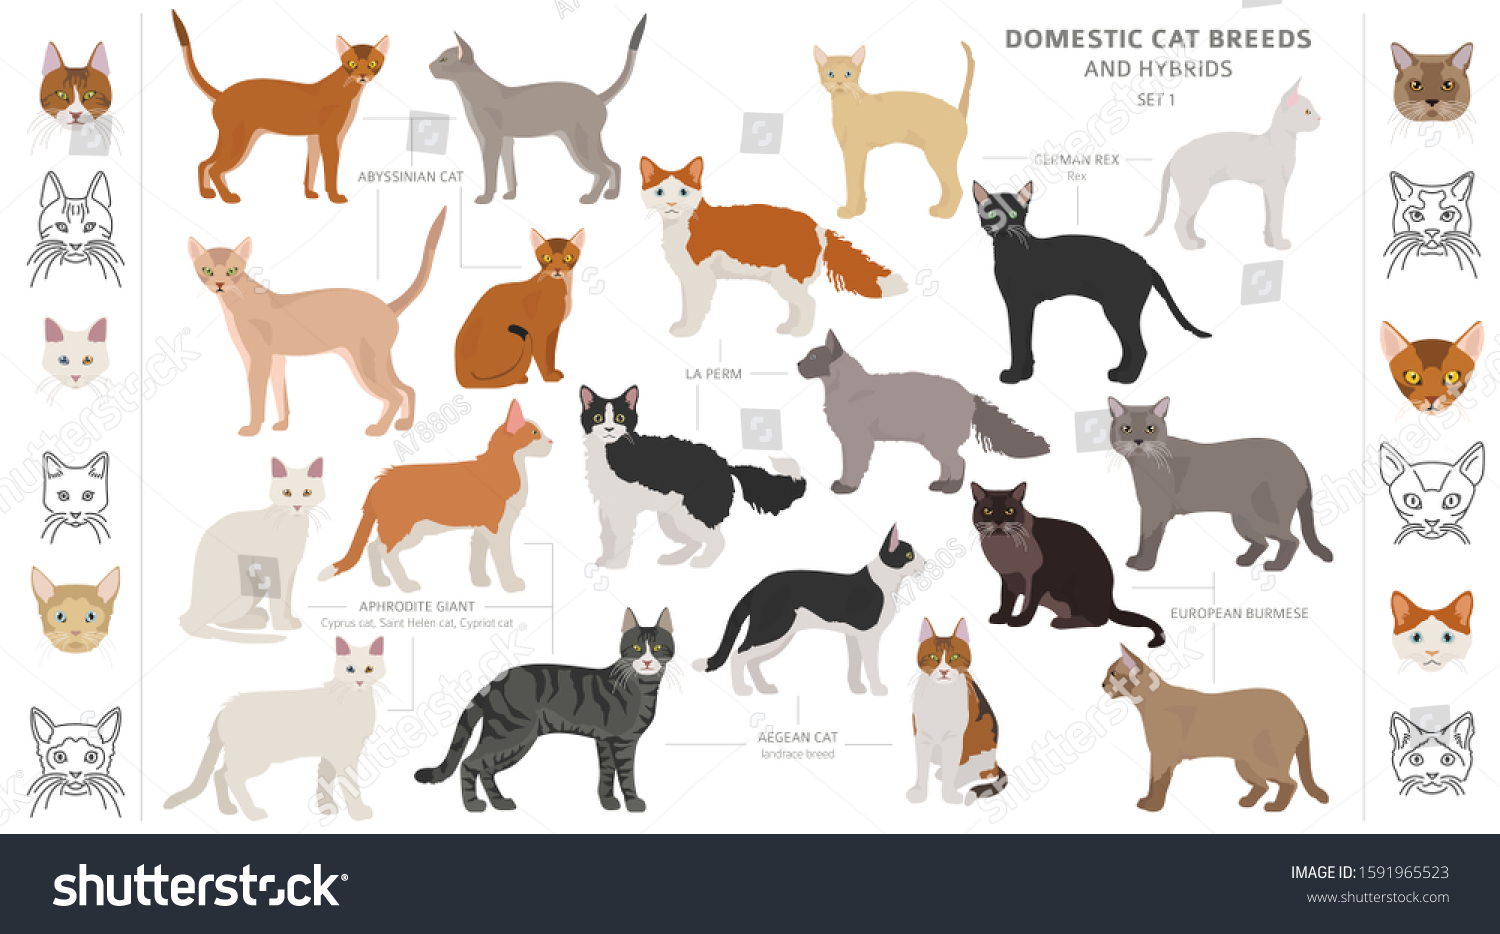 Domestic Cat Breeds Hybrids Collection Isolated Stock Vector Royalty Free 1591965523